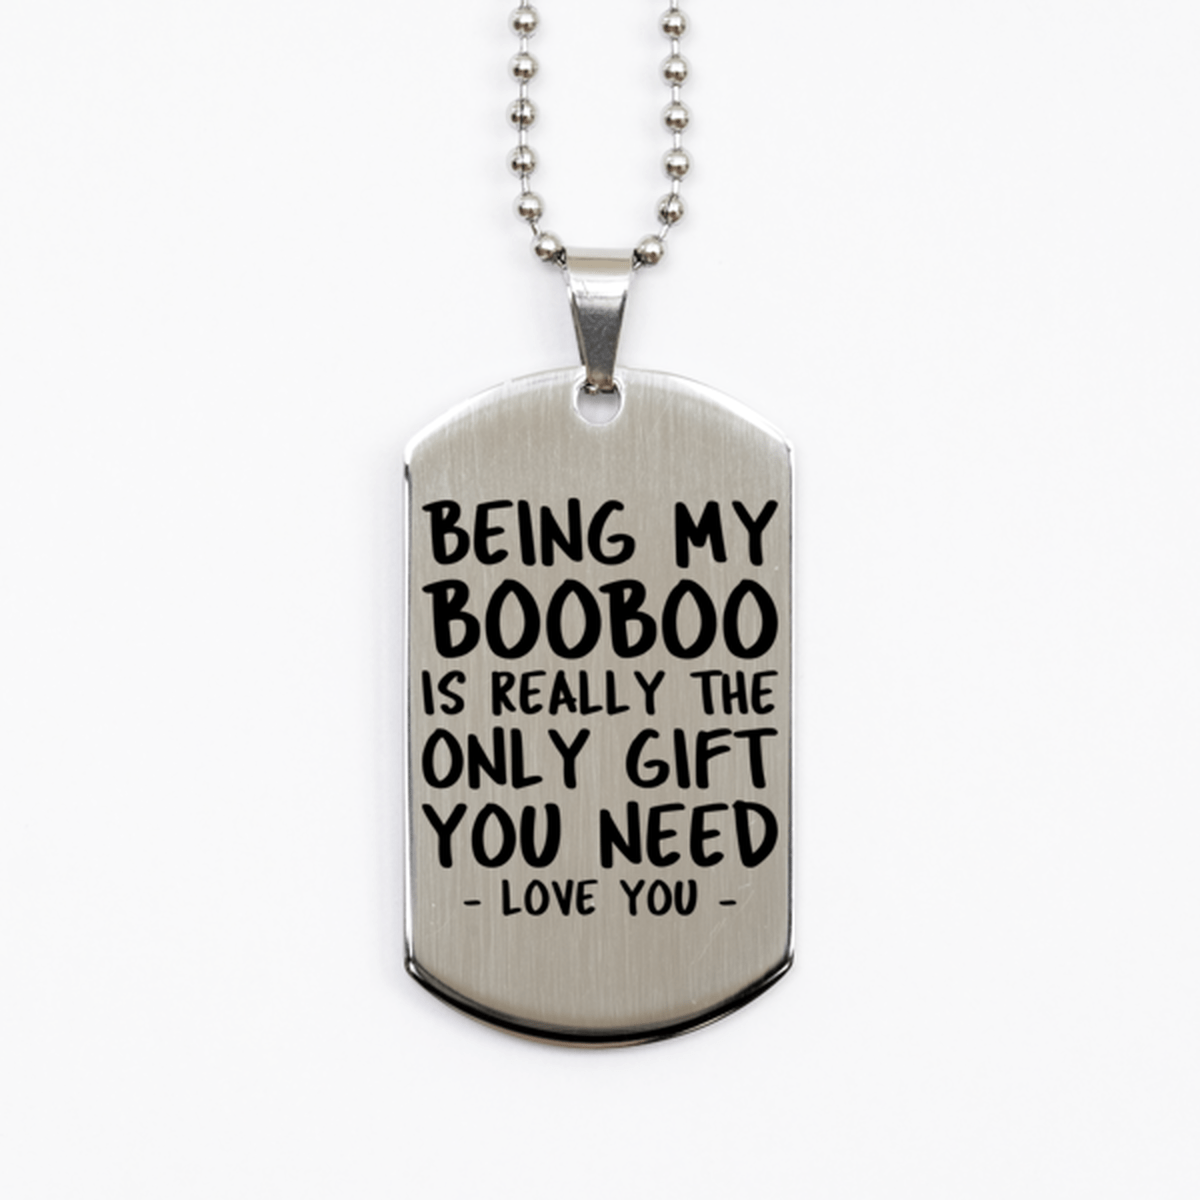 Funny Booboo Silver Dog Tag Necklace, Being My Booboo Is Really the Only Gift You Need, Best Birthday Gifts for Booboo